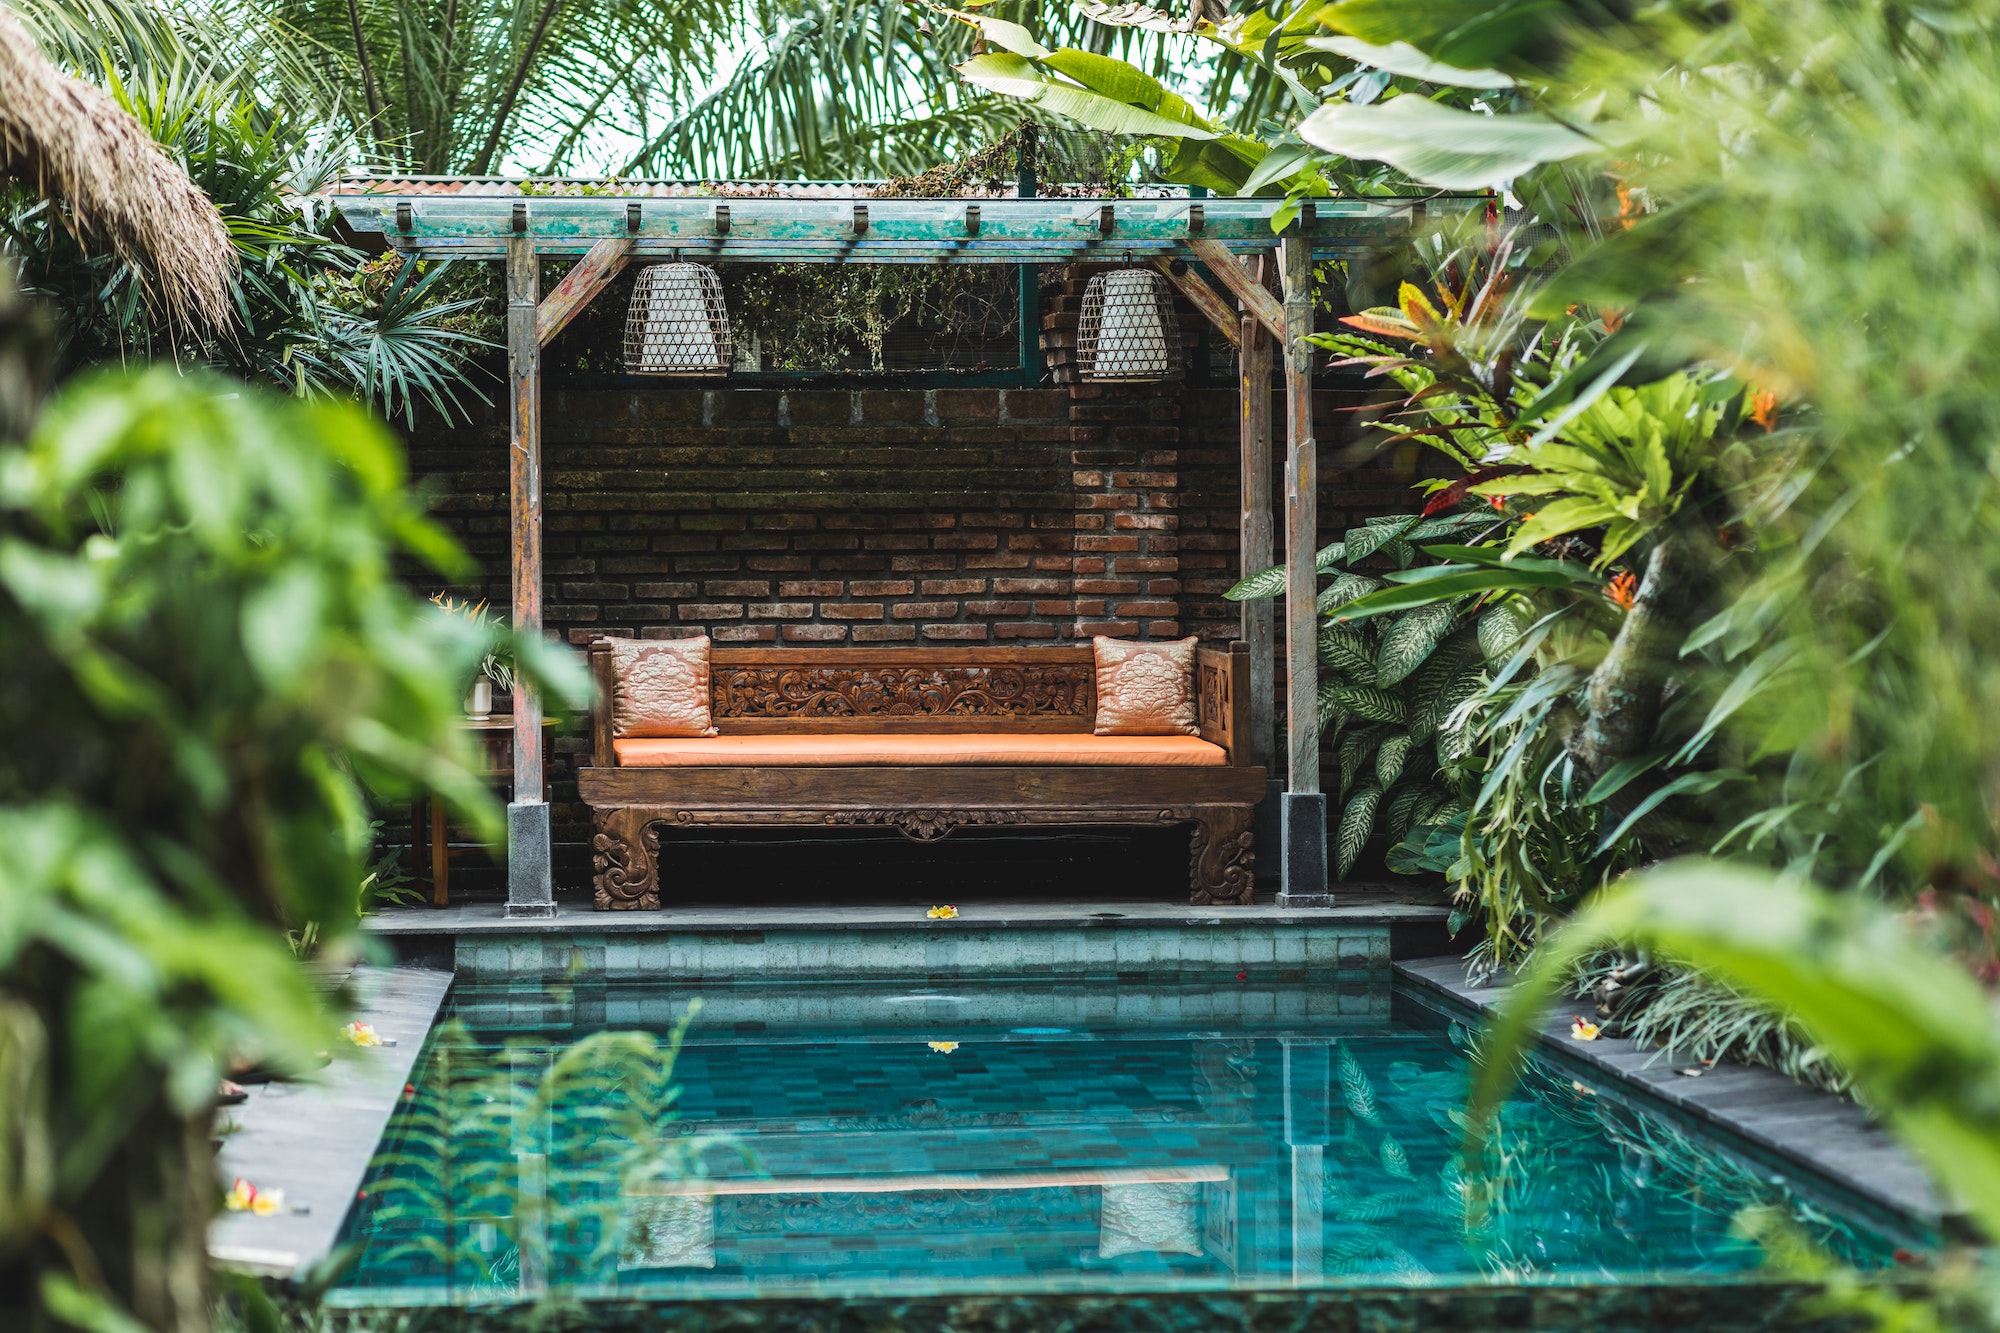 Small private swimming pool in Bali house. Green tropical plants around, wooden sofa.